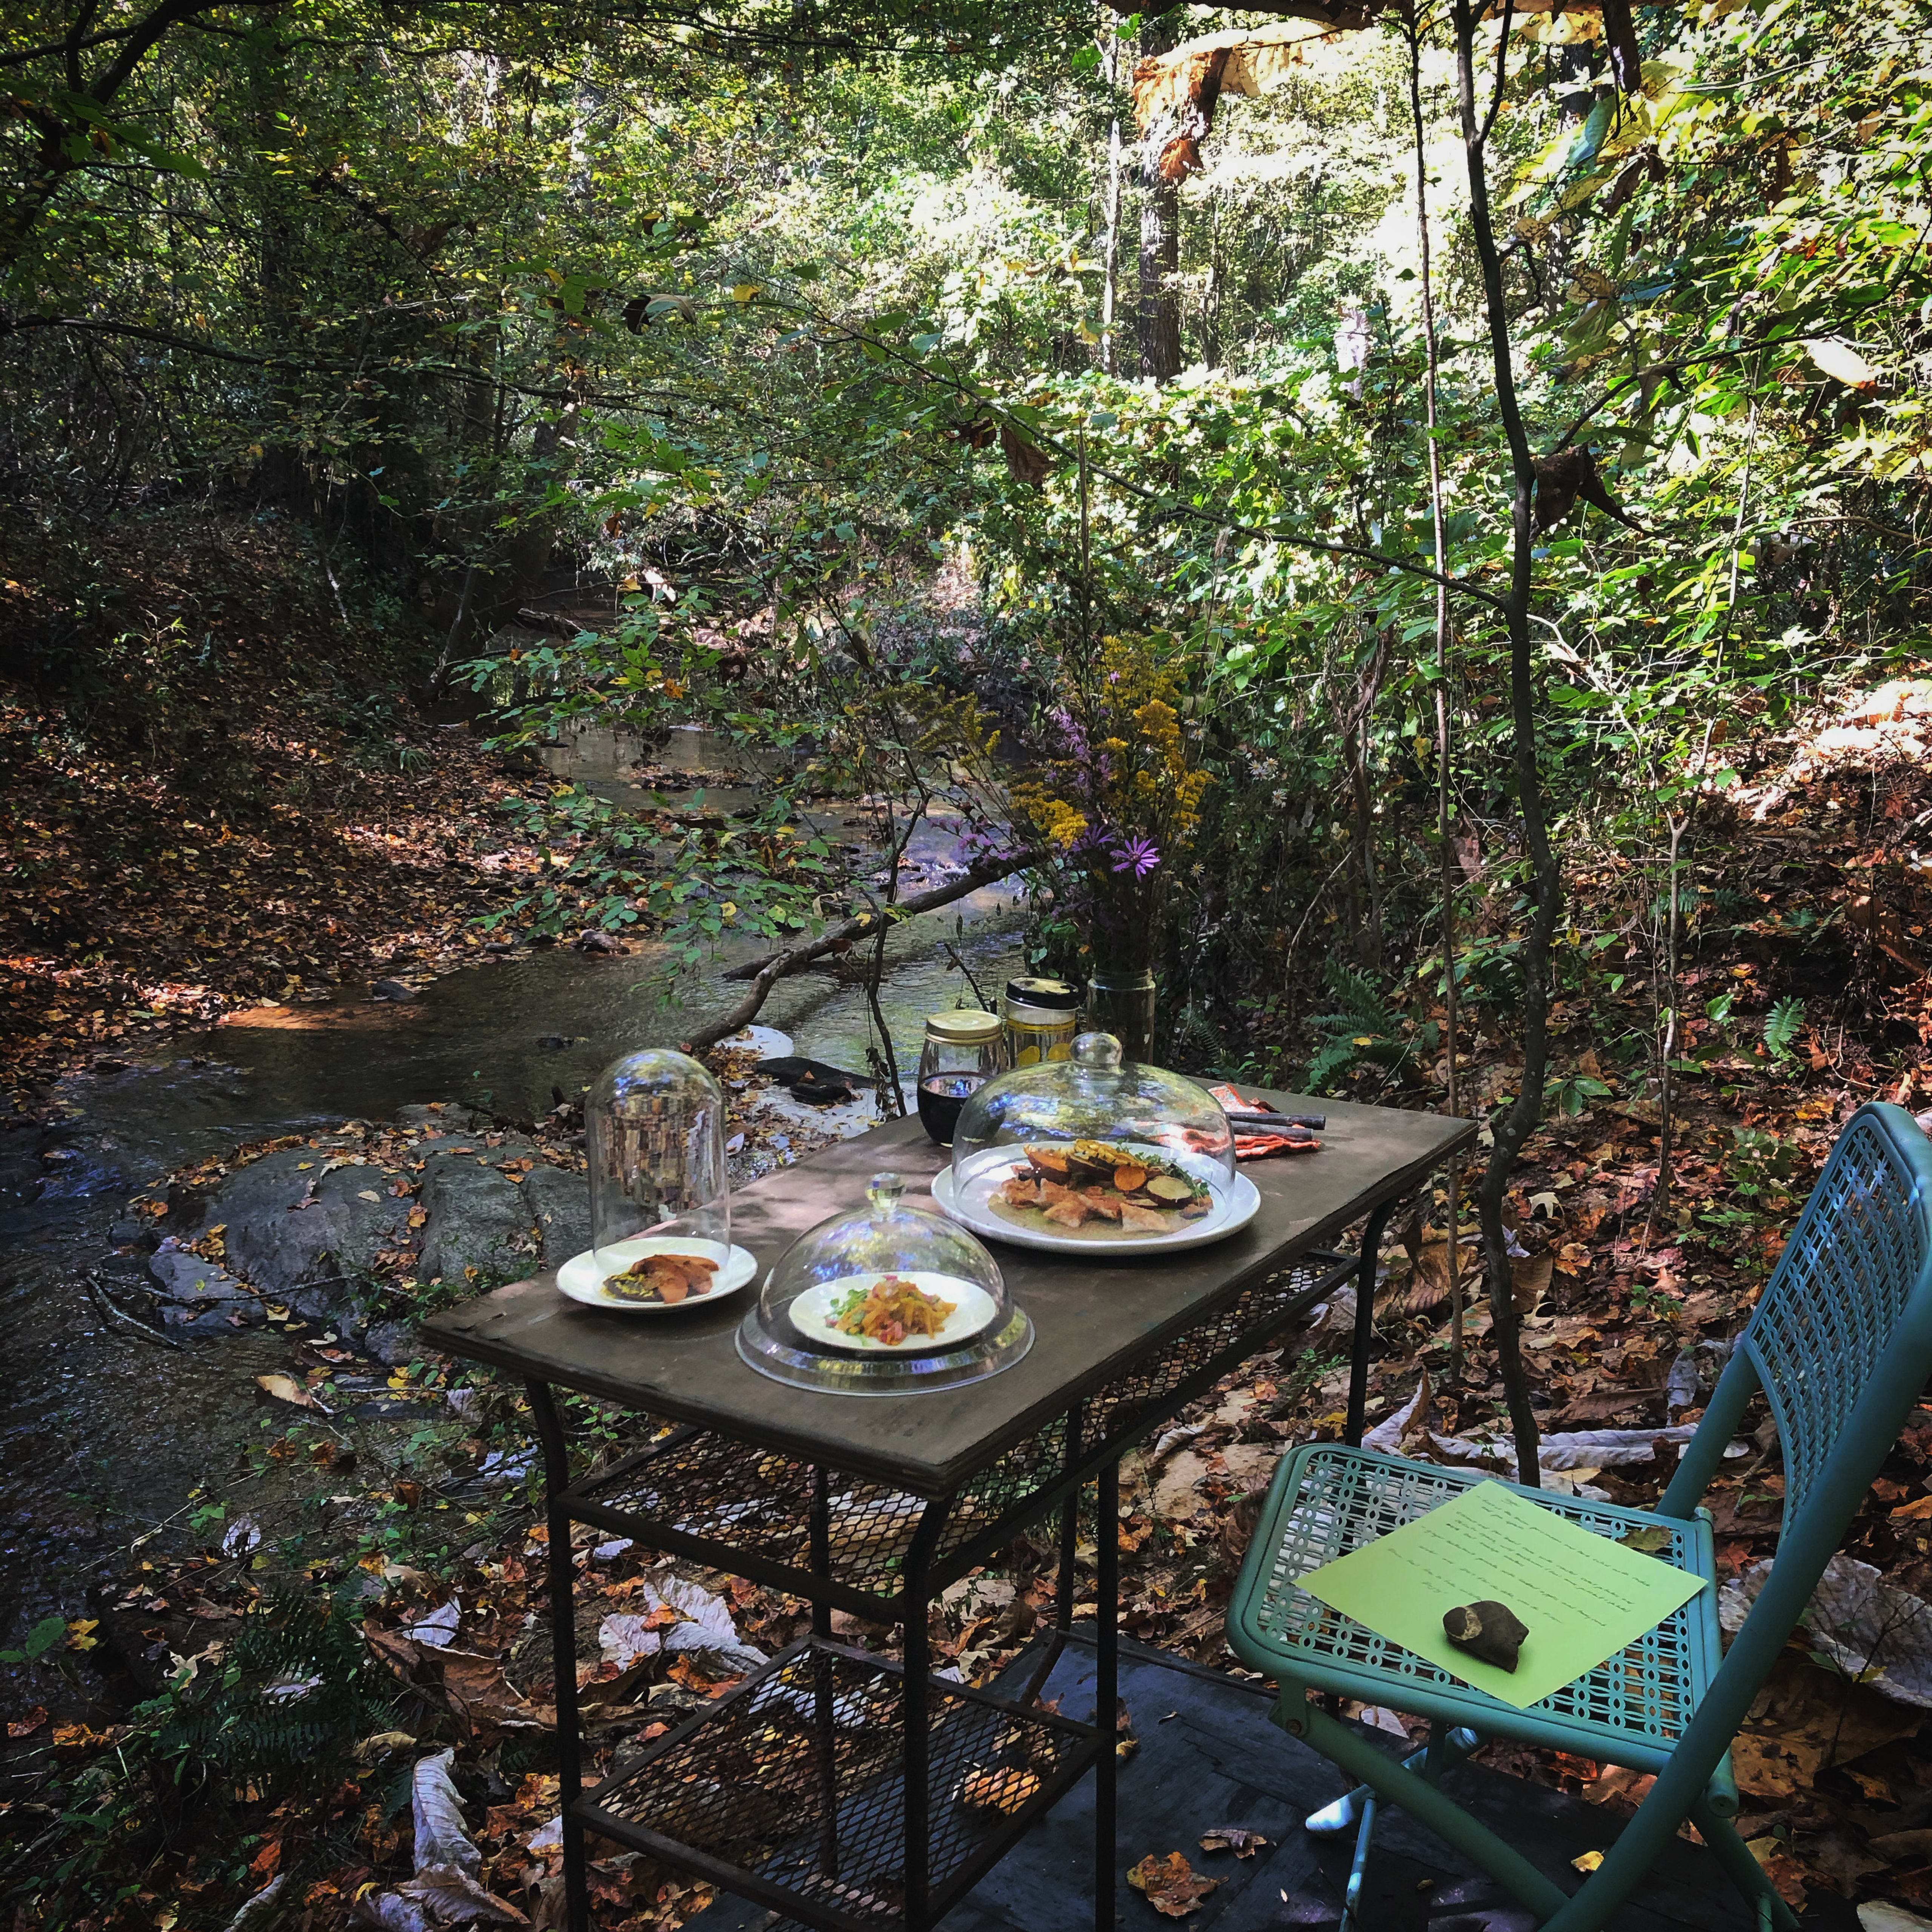 Table for One: A Solo Dining Experience in the Georgia Woods